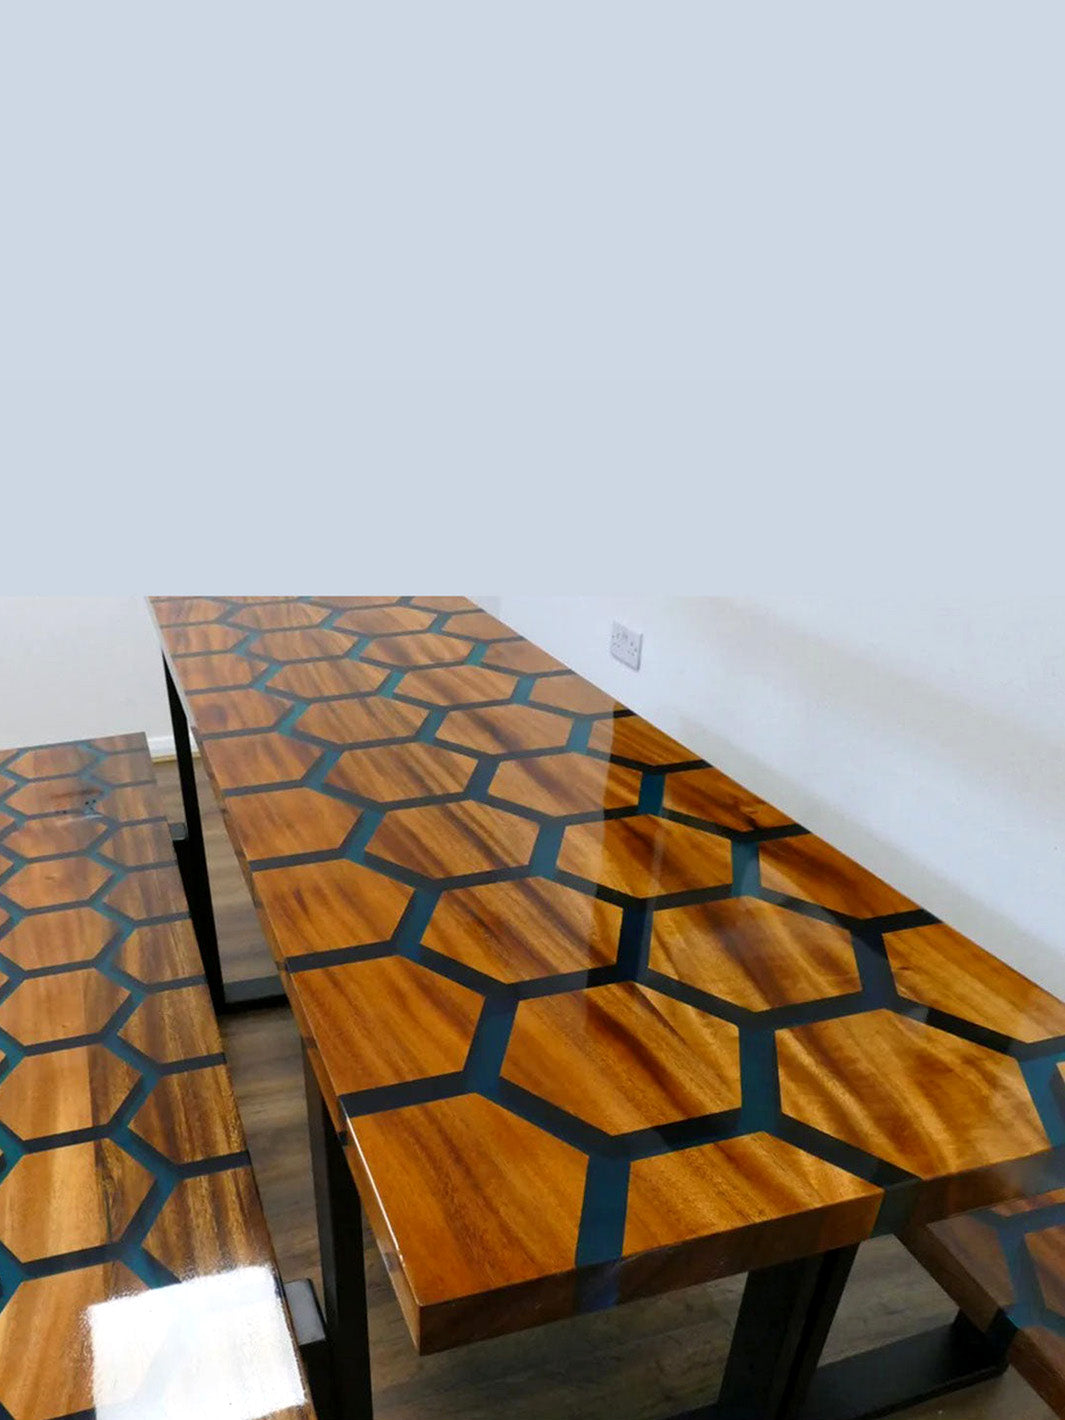 Handcrafted Rosewood Slab Epoxy Resin Wooden Dining Table & Benches Made 4 Decor Tables MDR0003-3